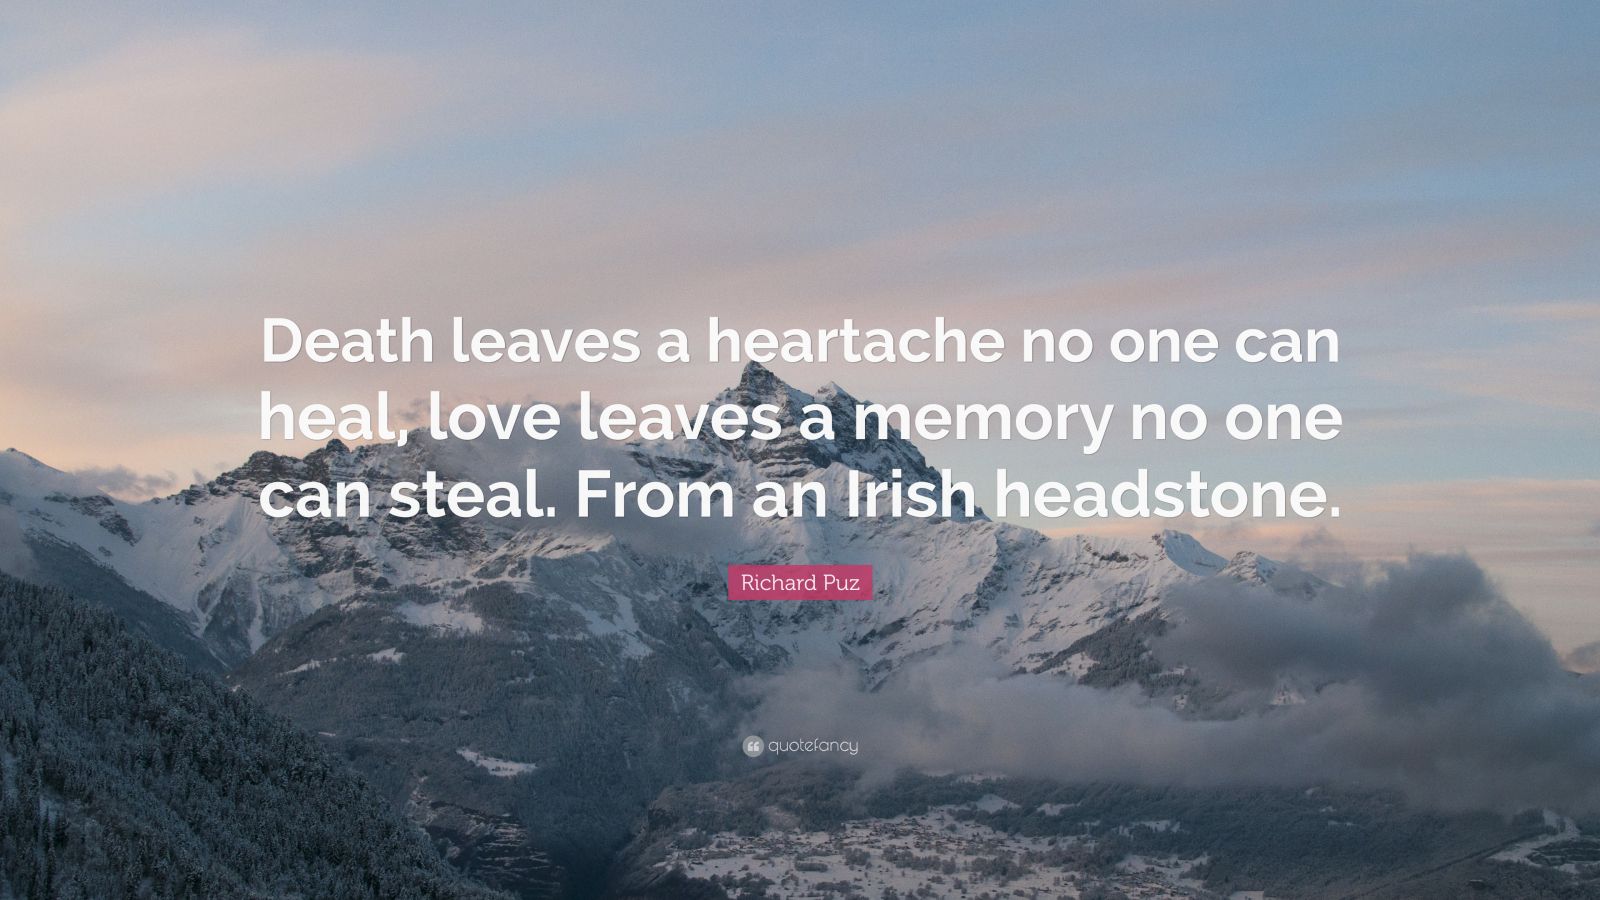 Richard Puz Quote: "Death leaves a heartache no one can heal, love leaves a memory no one can ...